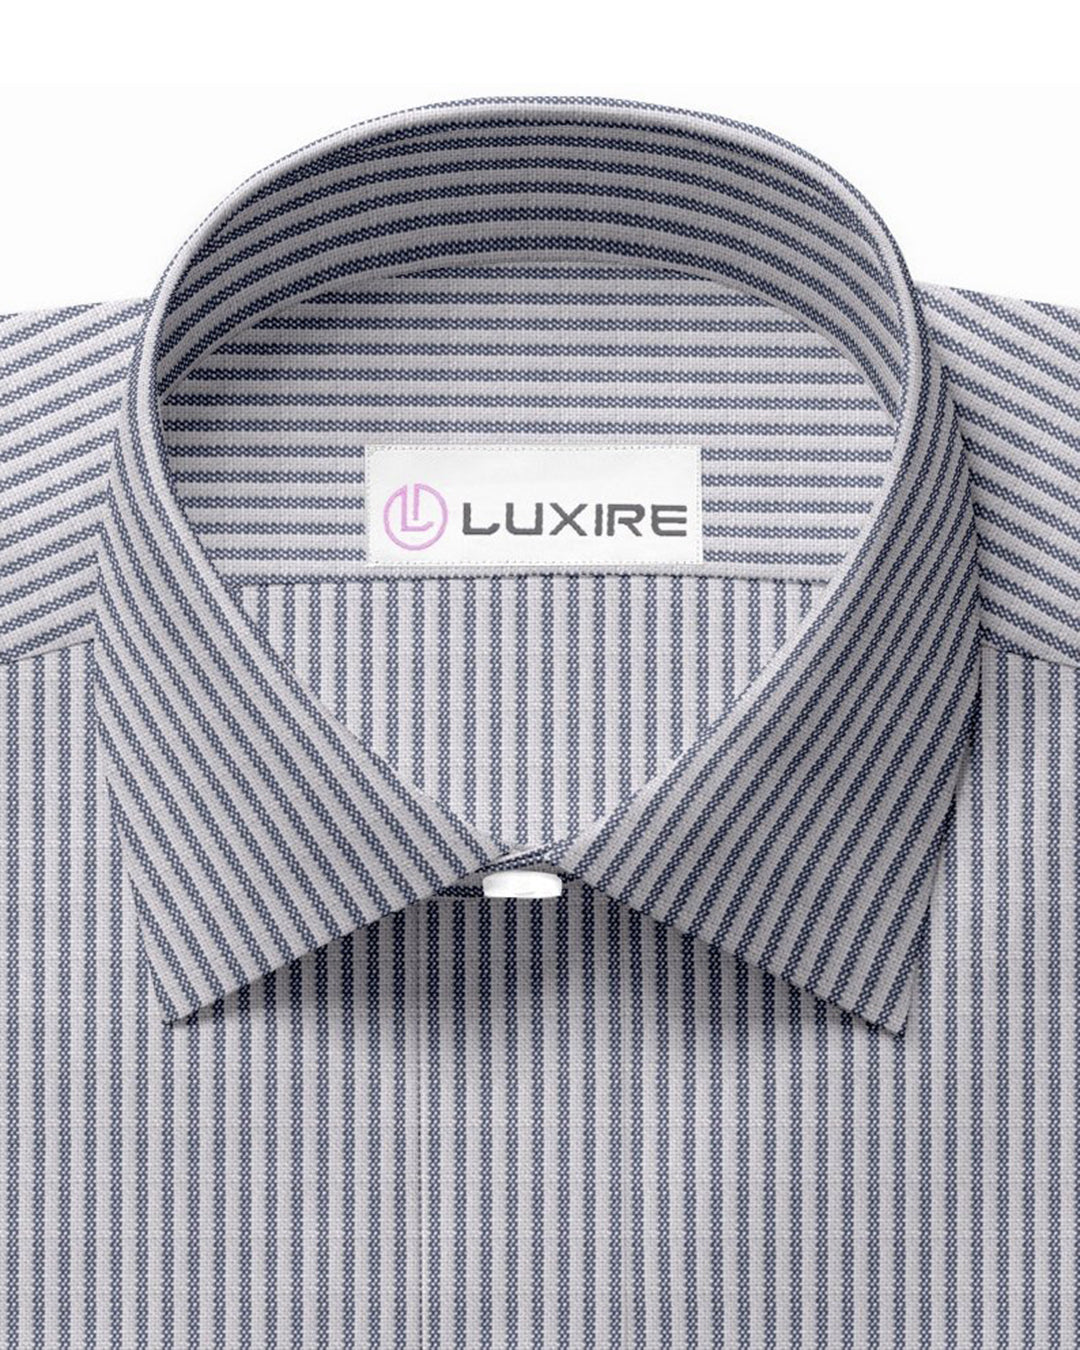 Collar of the custom linen shirt for men in blue and white stripes by Luxire Clothing